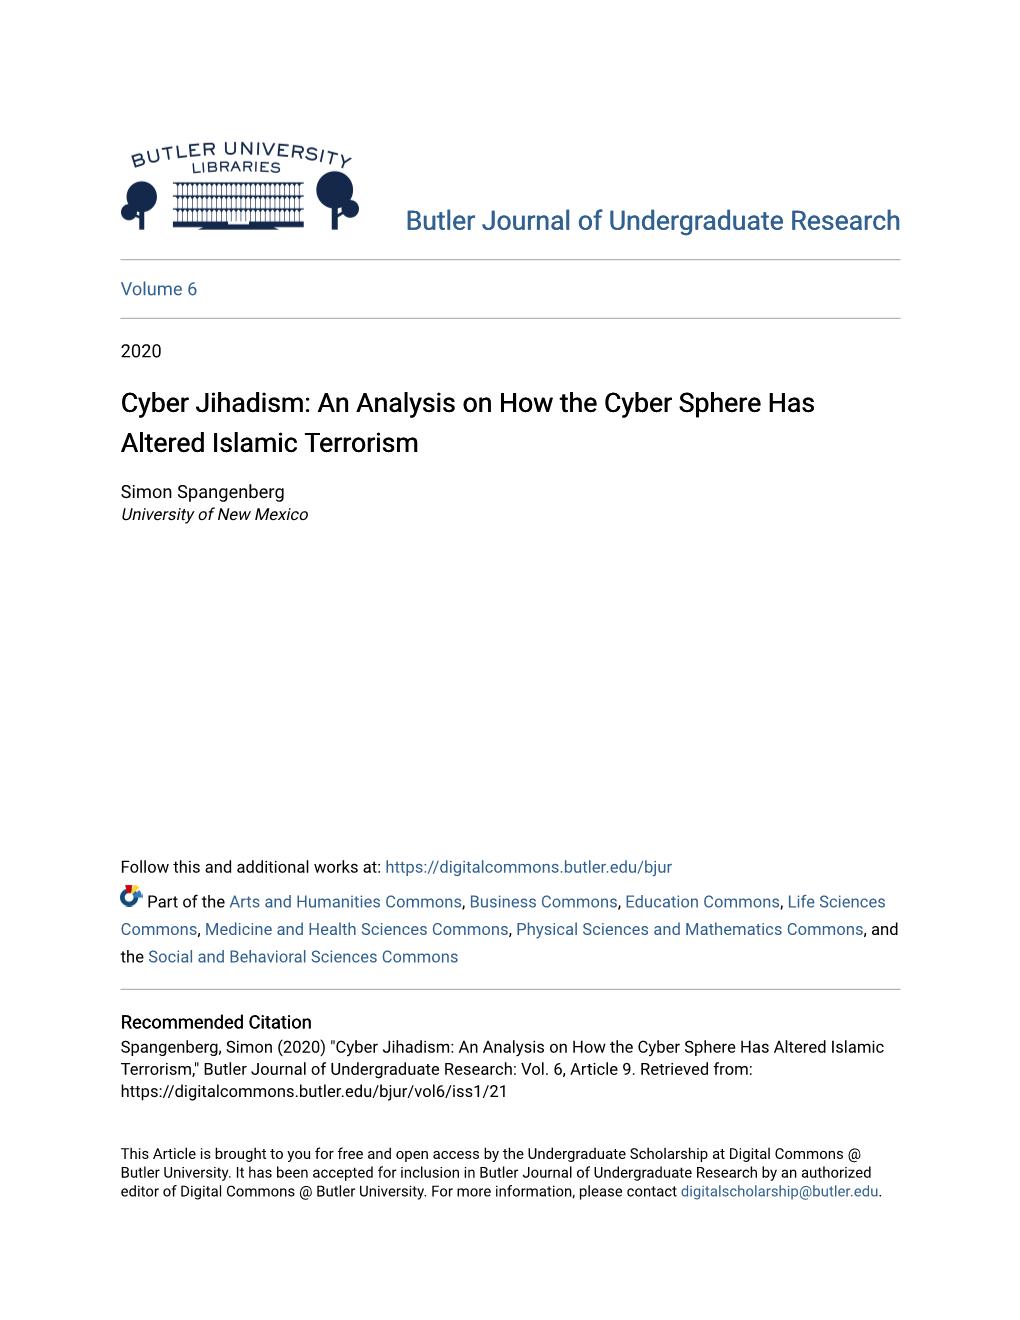 Cyber Jihadism: an Analysis on How the Cyber Sphere Has Altered Islamic Terrorism